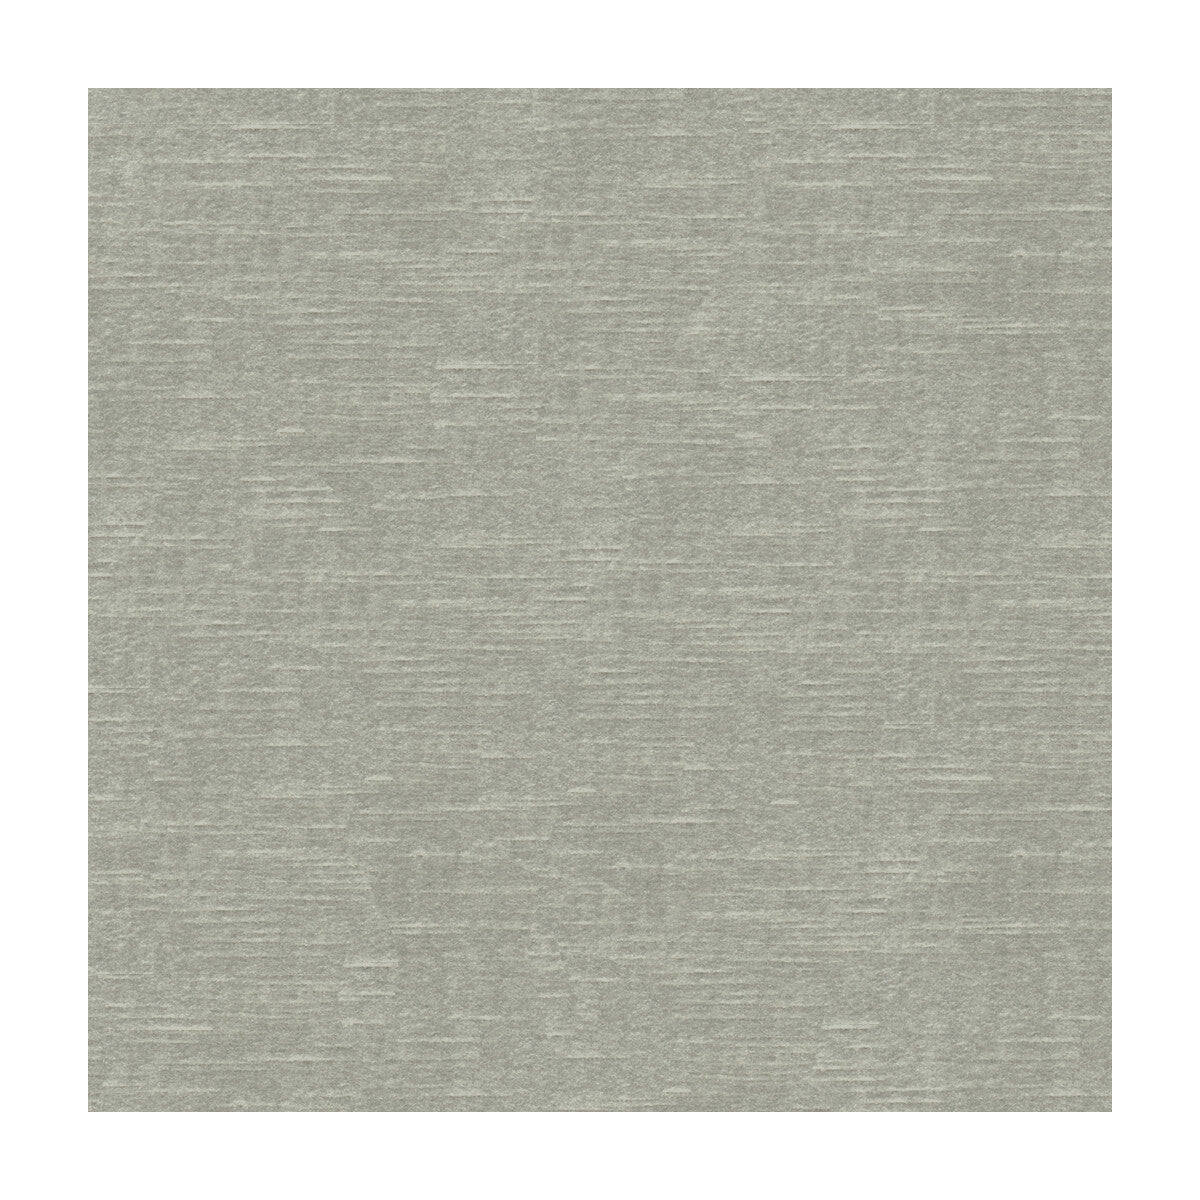 Venetian fabric in grey color - pattern 31326.2111.0 - by Kravet Design in the The Complete Velvet collection